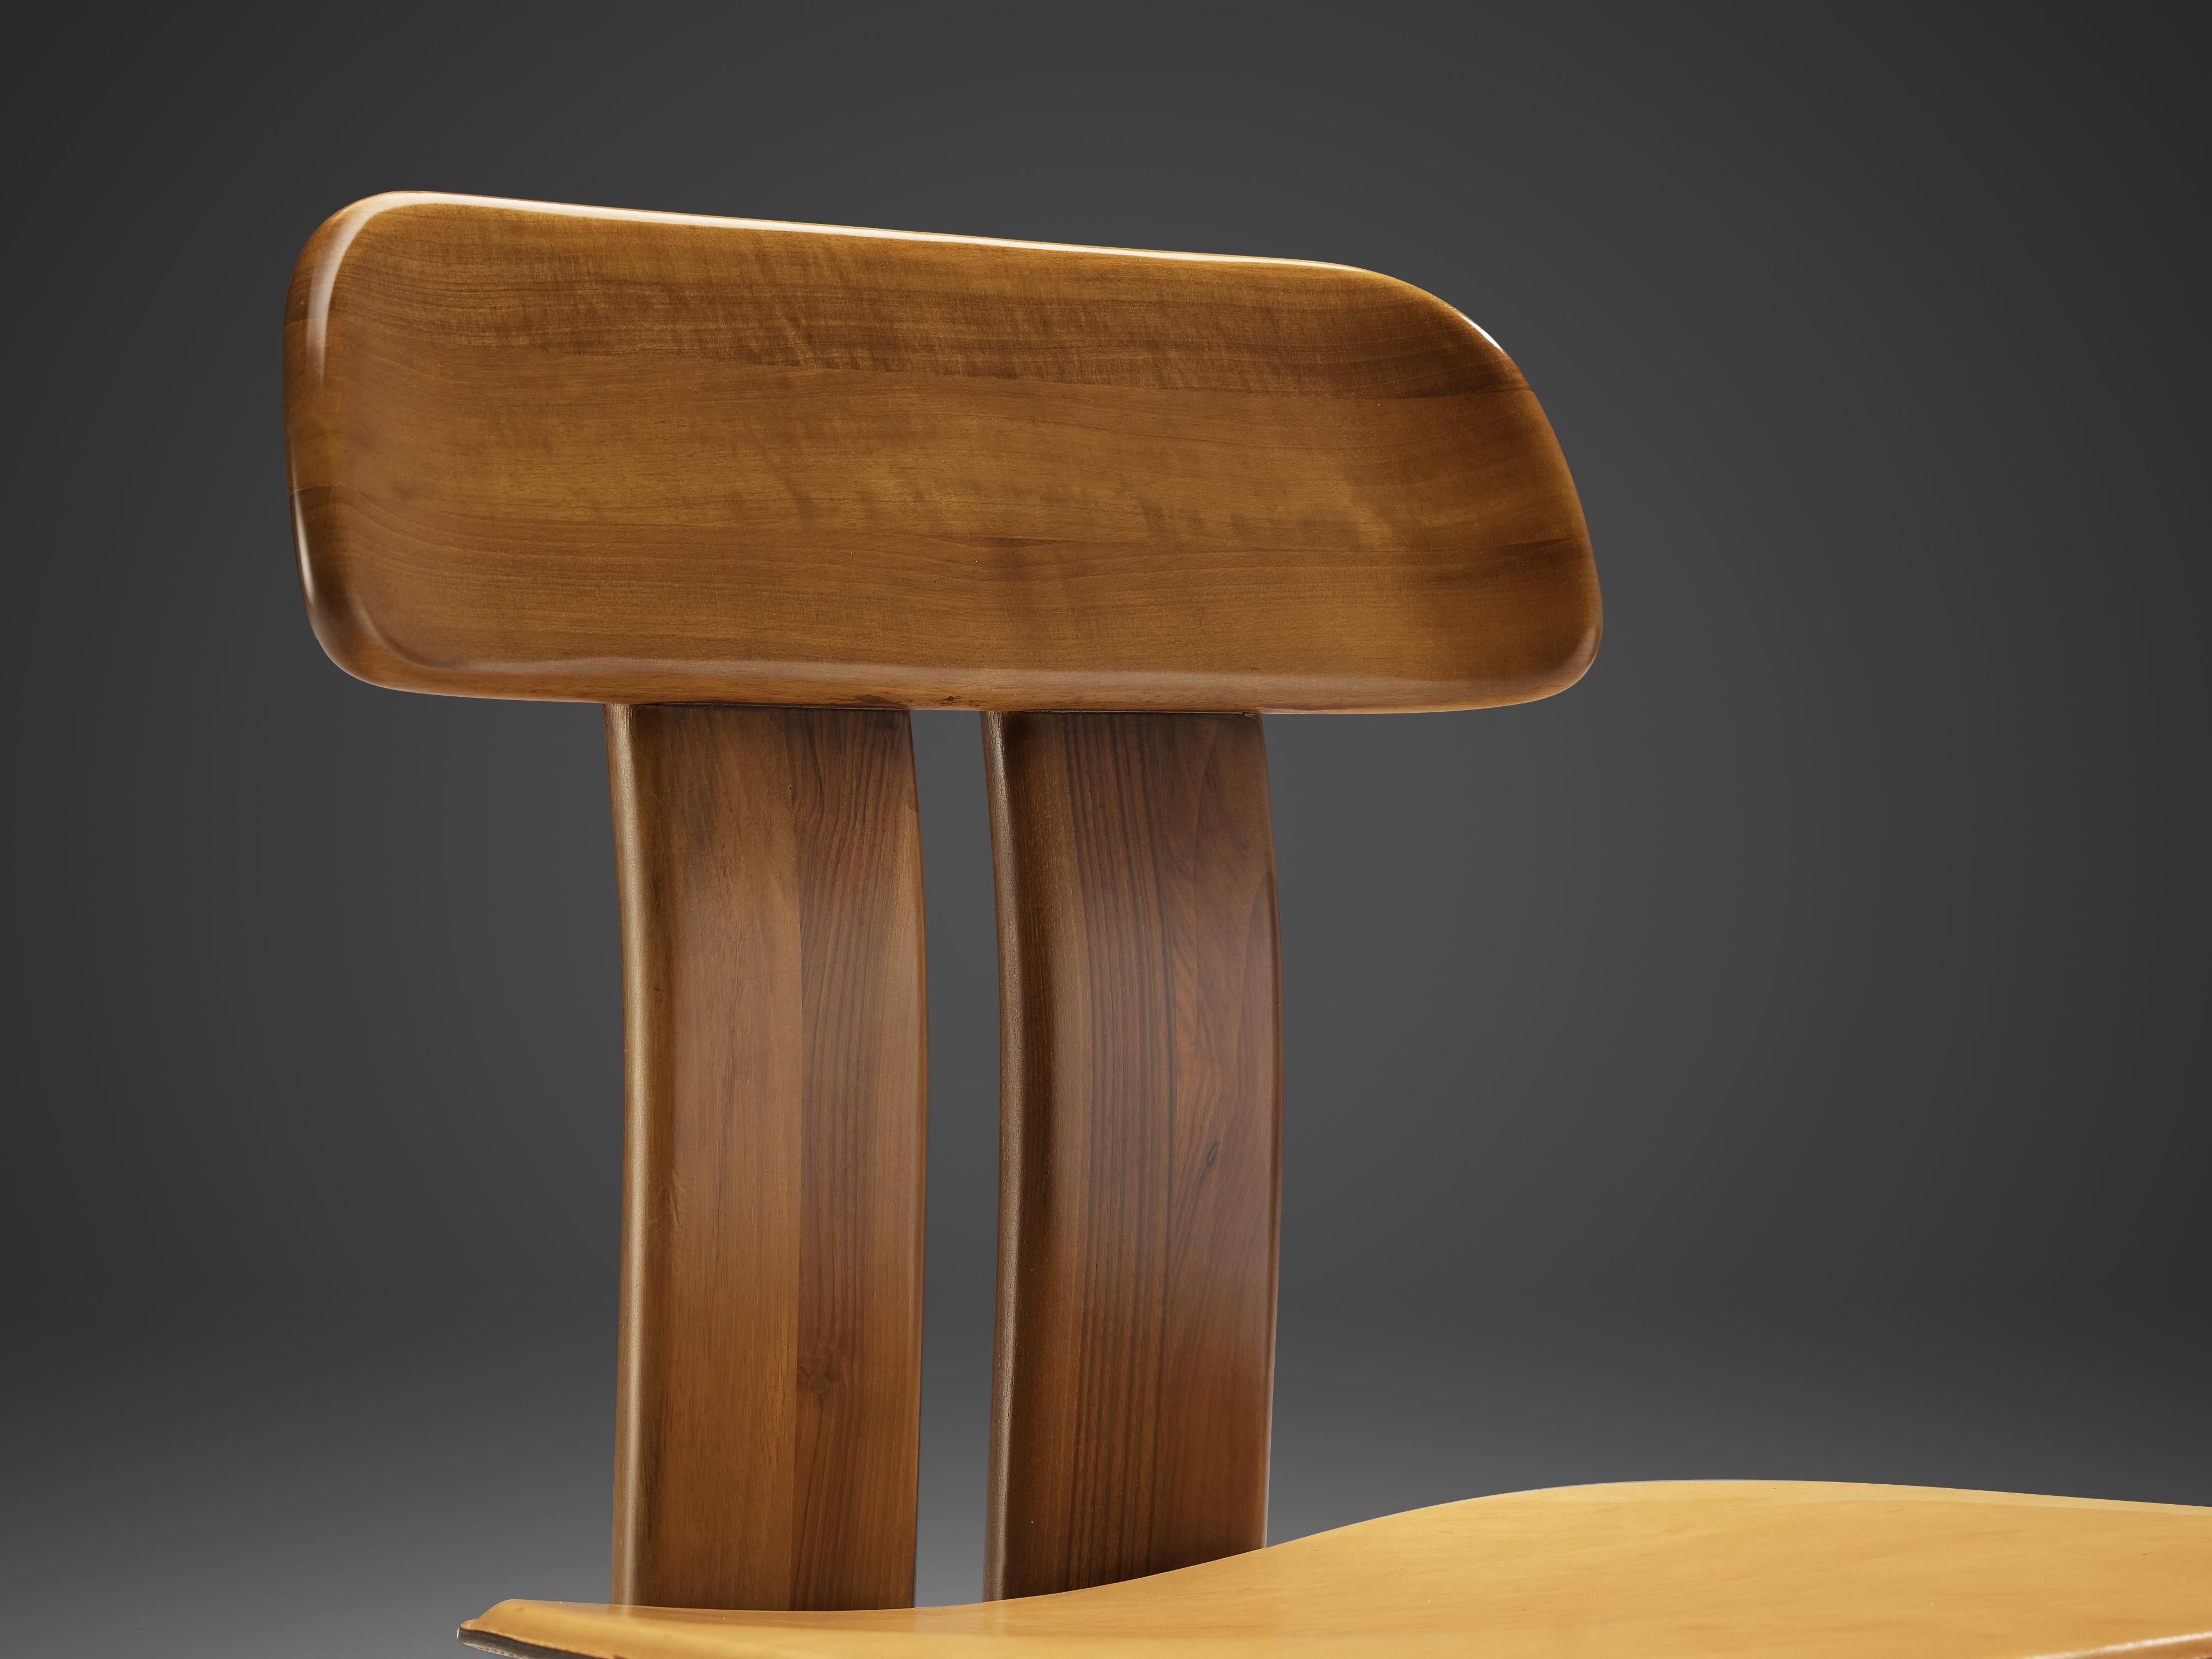 Mario Marenco for Mobil Girgi ‘Sapporo’ Dining Chair in Walnut and Leather  1